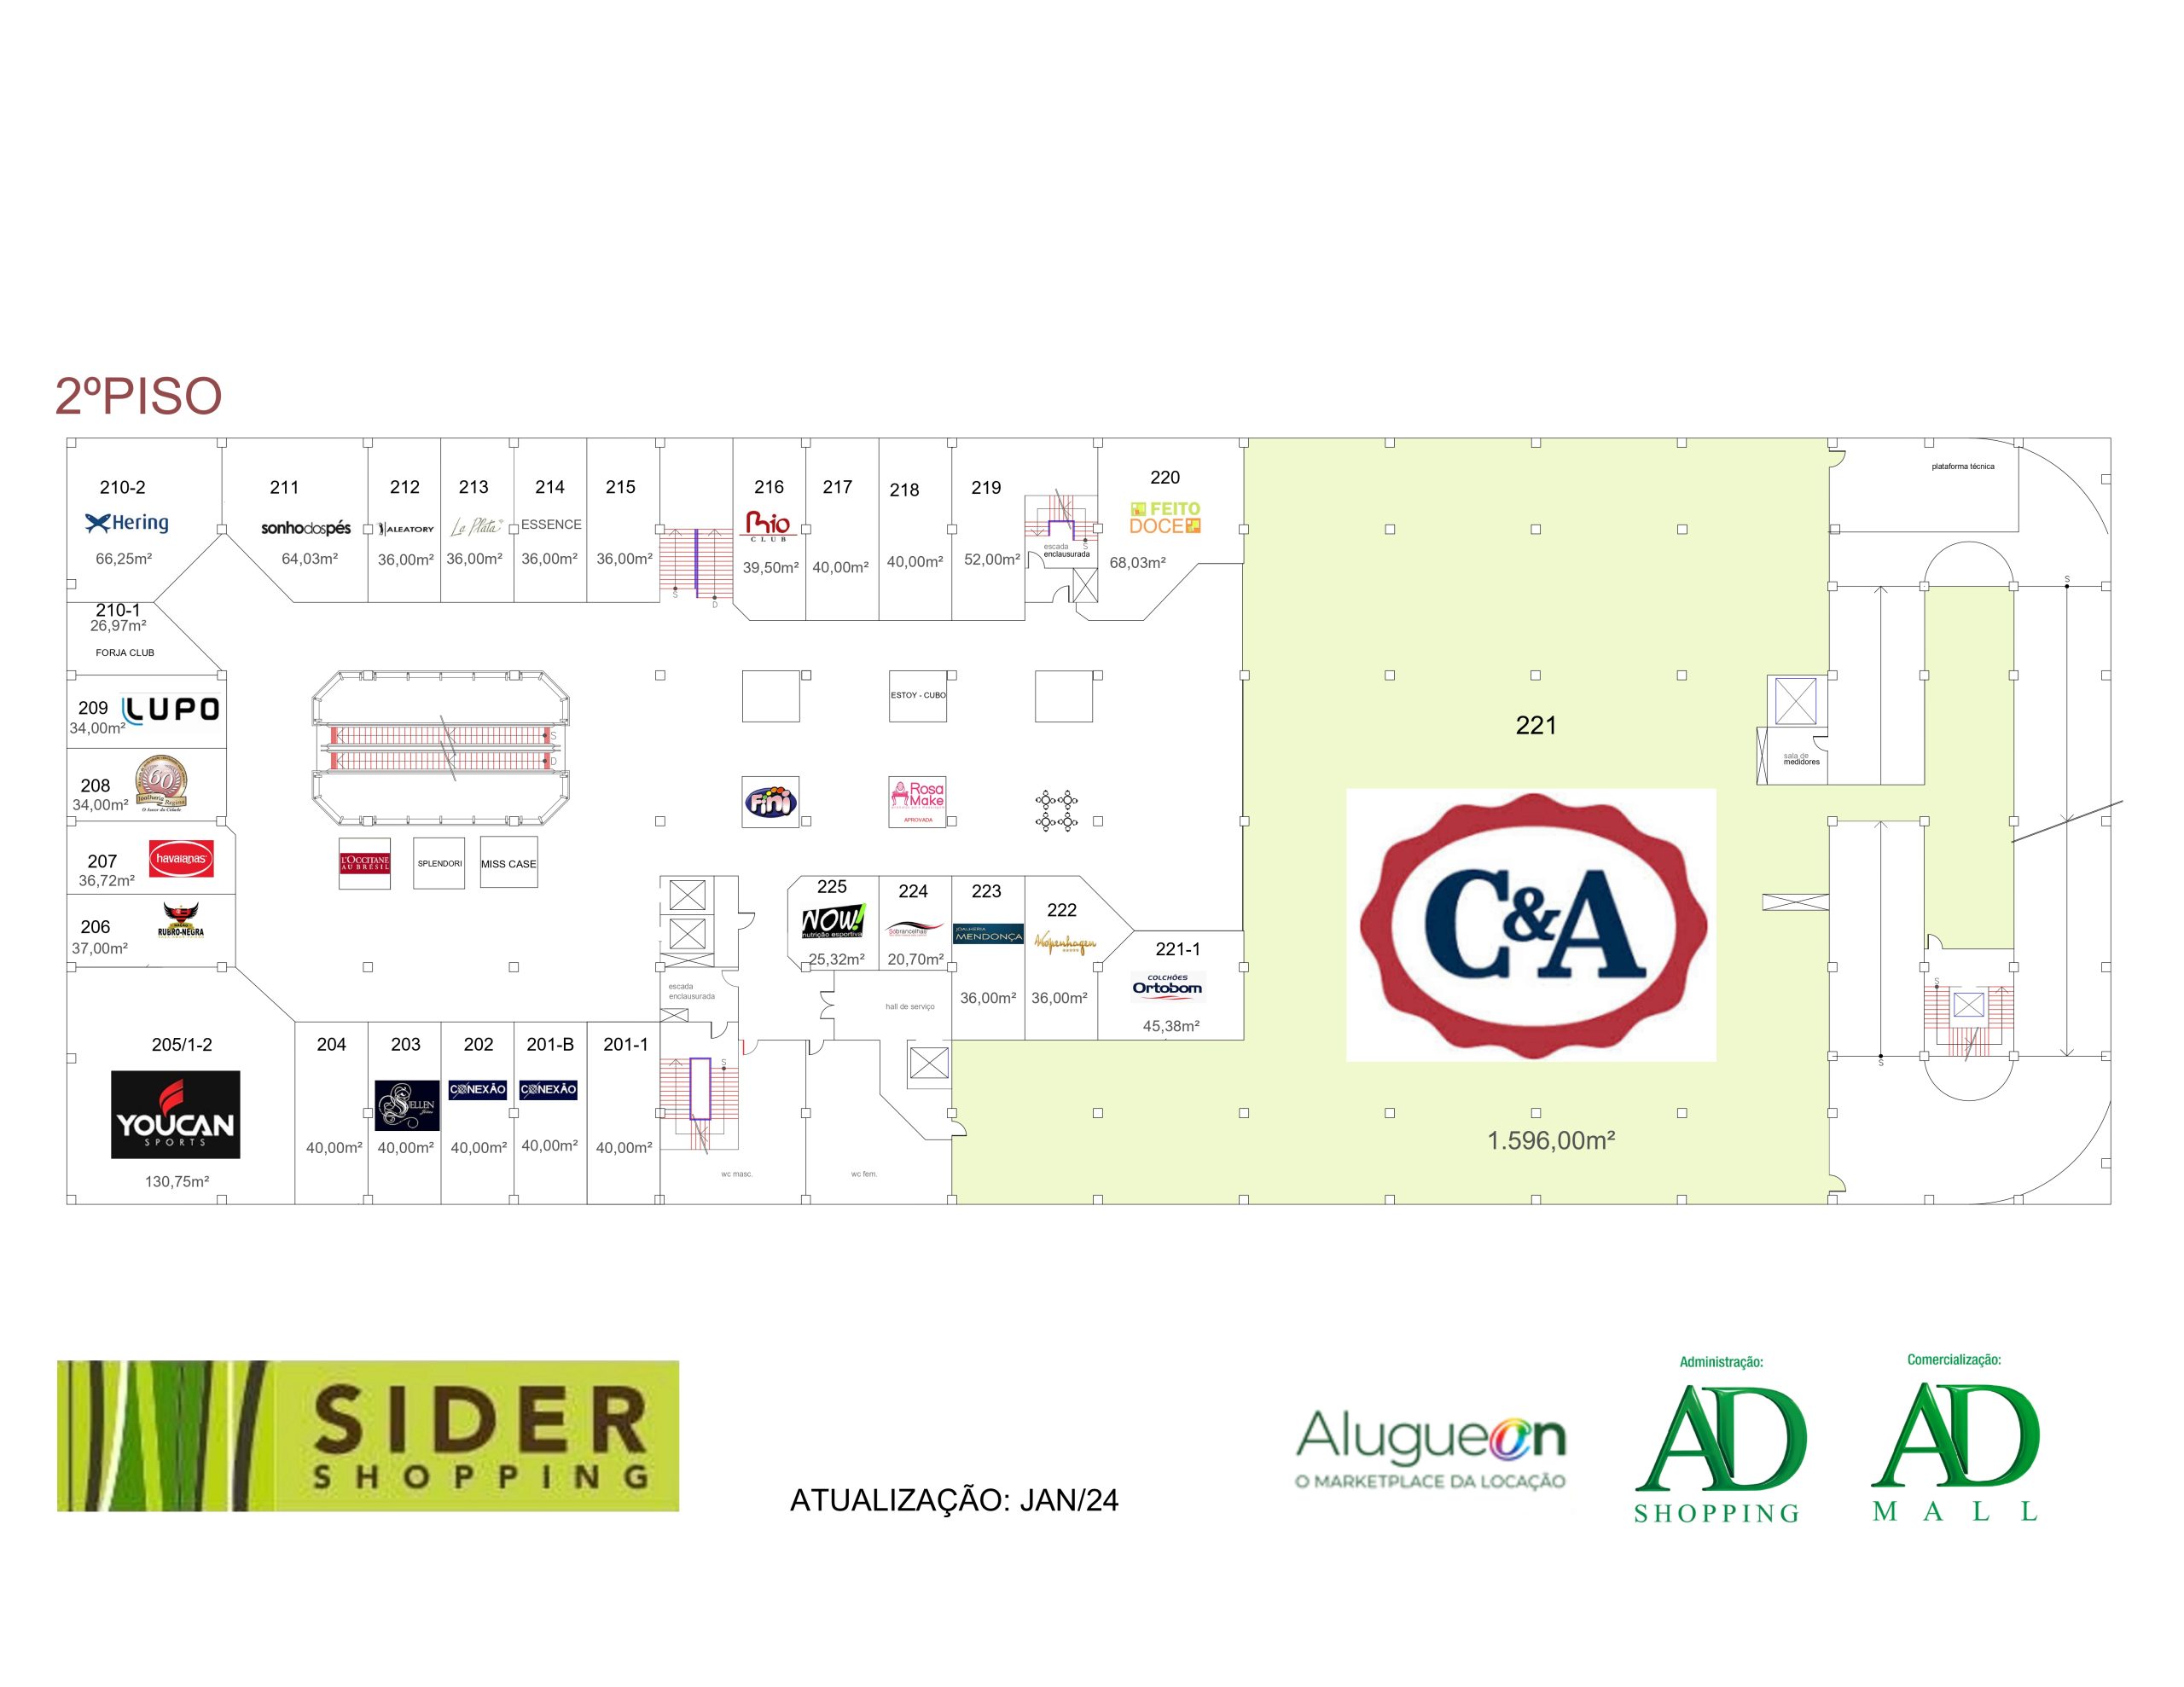 Sider-Shopping-AlugueOn-Piso3